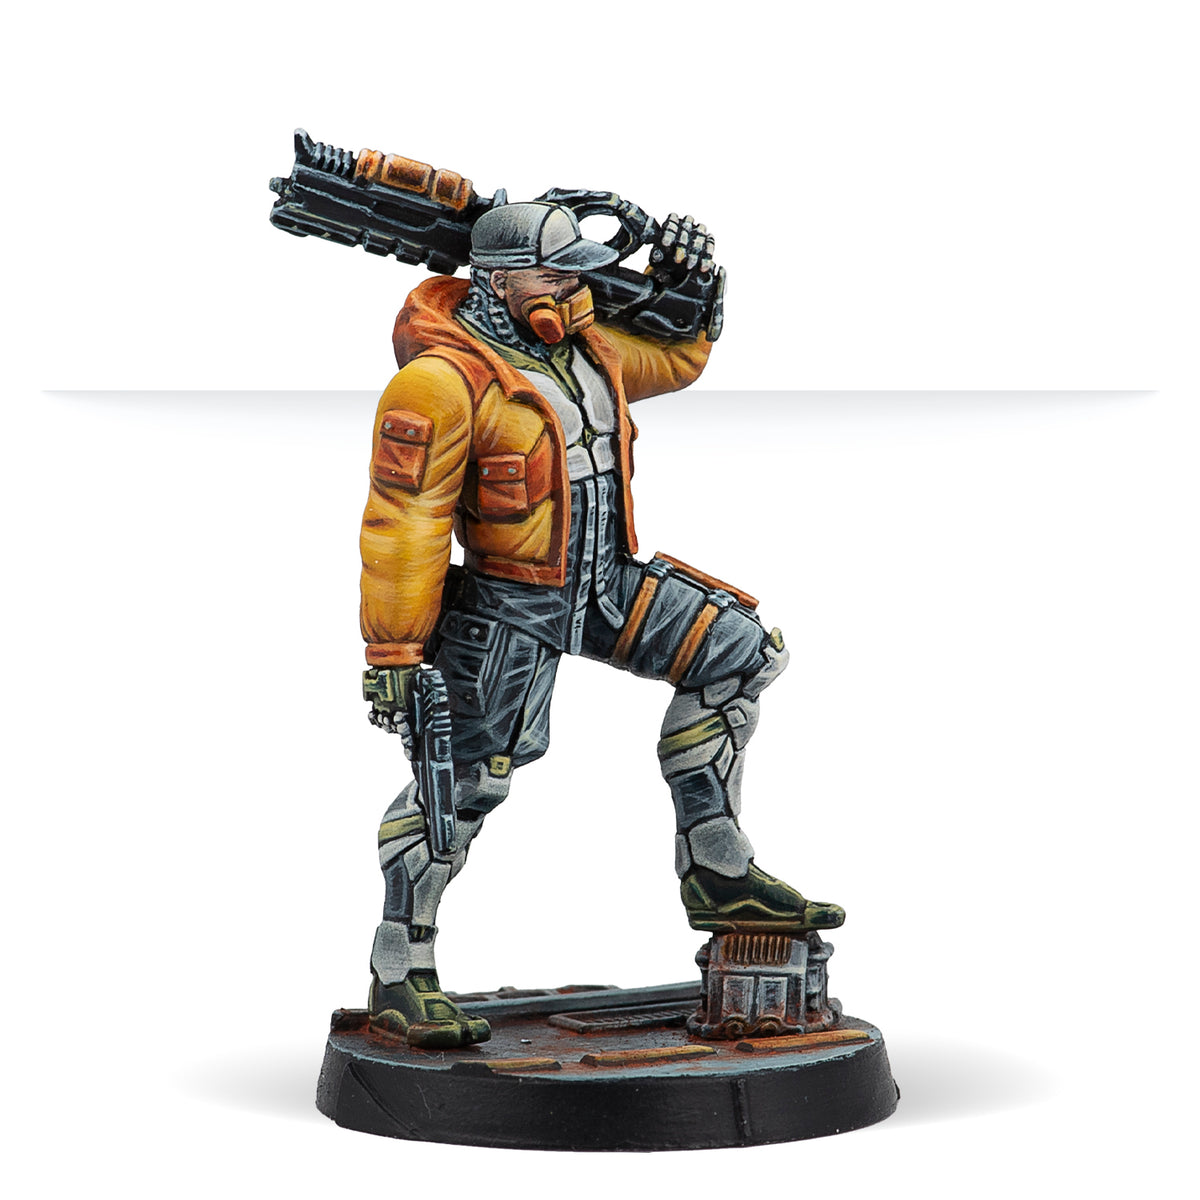 Bounty Hunter Event Exclusive Edition [LIMITED EDITION]